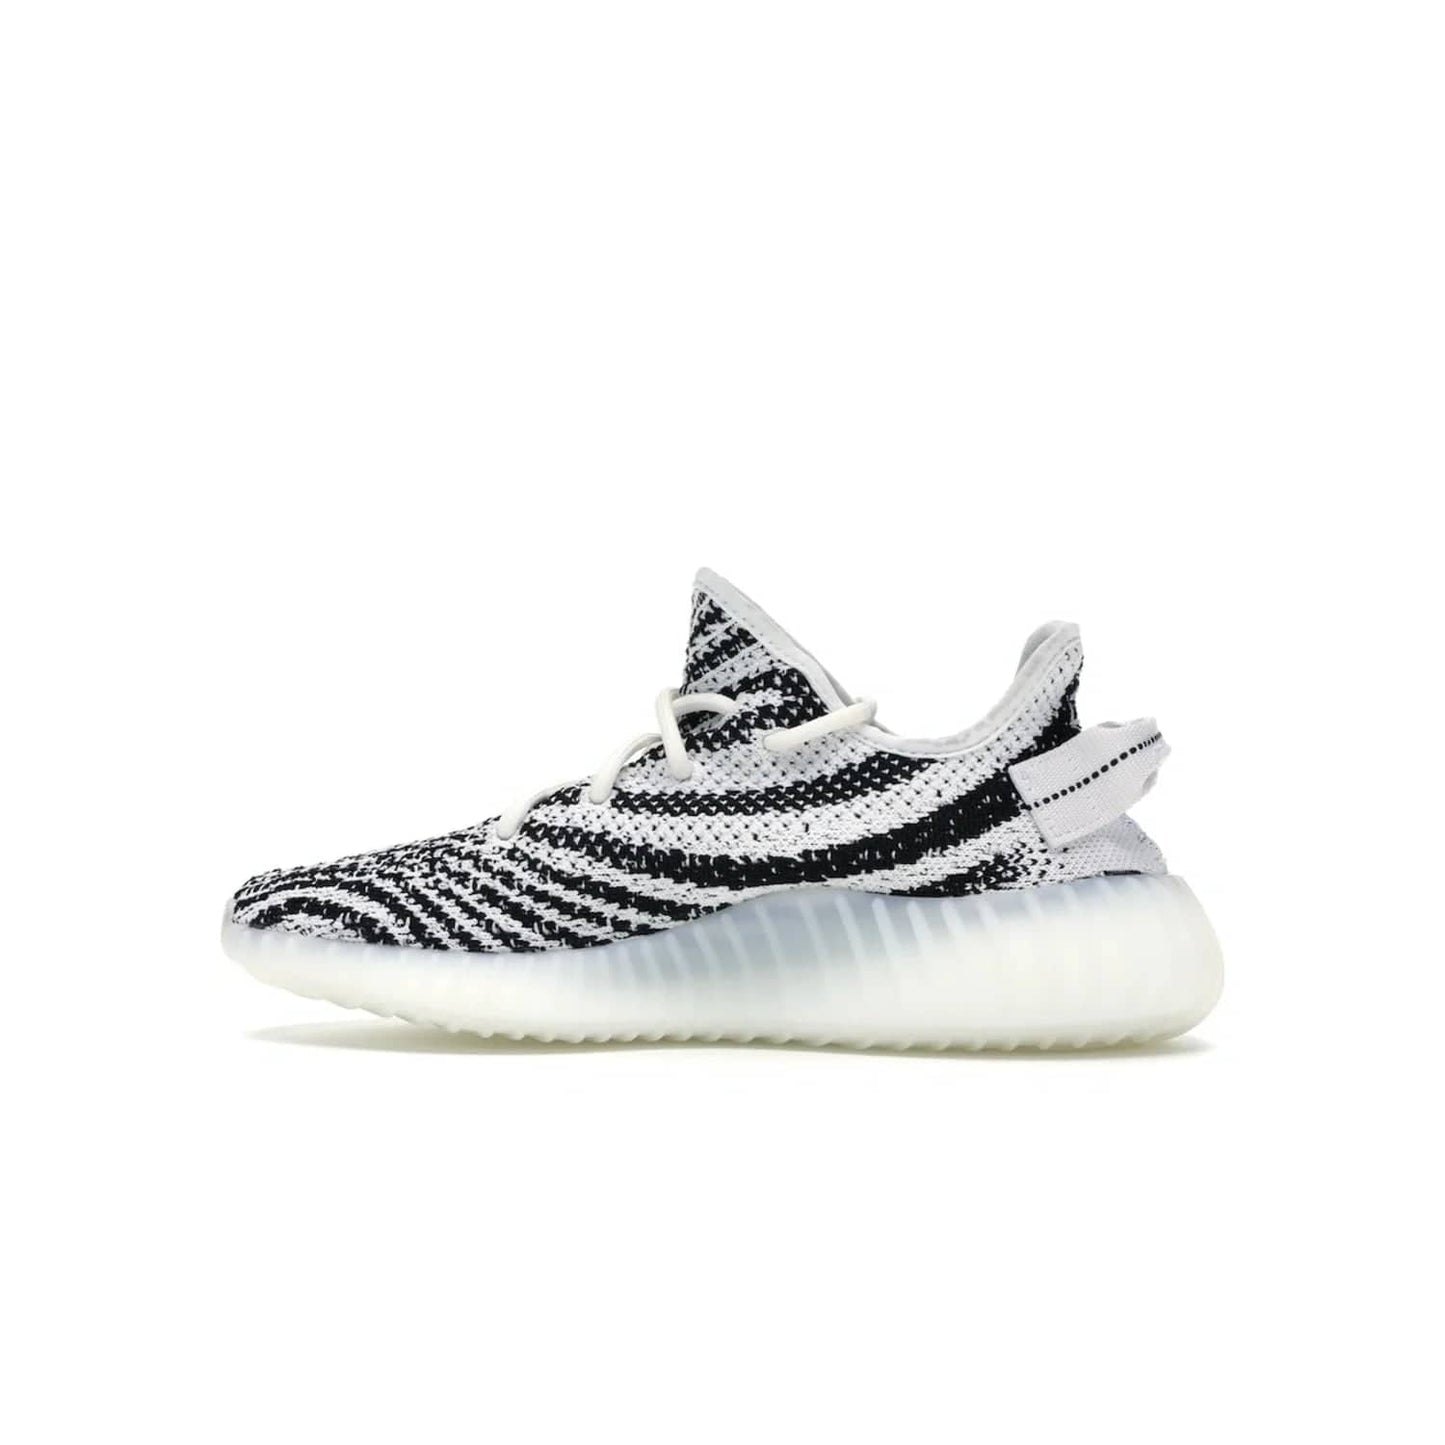 adidas Yeezy Boost 350 V2 Zebra - Image 20 - Only at www.BallersClubKickz.com - #
Score the iconic adidas Yeezy Boost 350 V2 Zebra for a fashionable addition to your street-style. Featuring a Primeknit upper and Boost sole, you'll look great and feel comfortable with every step.